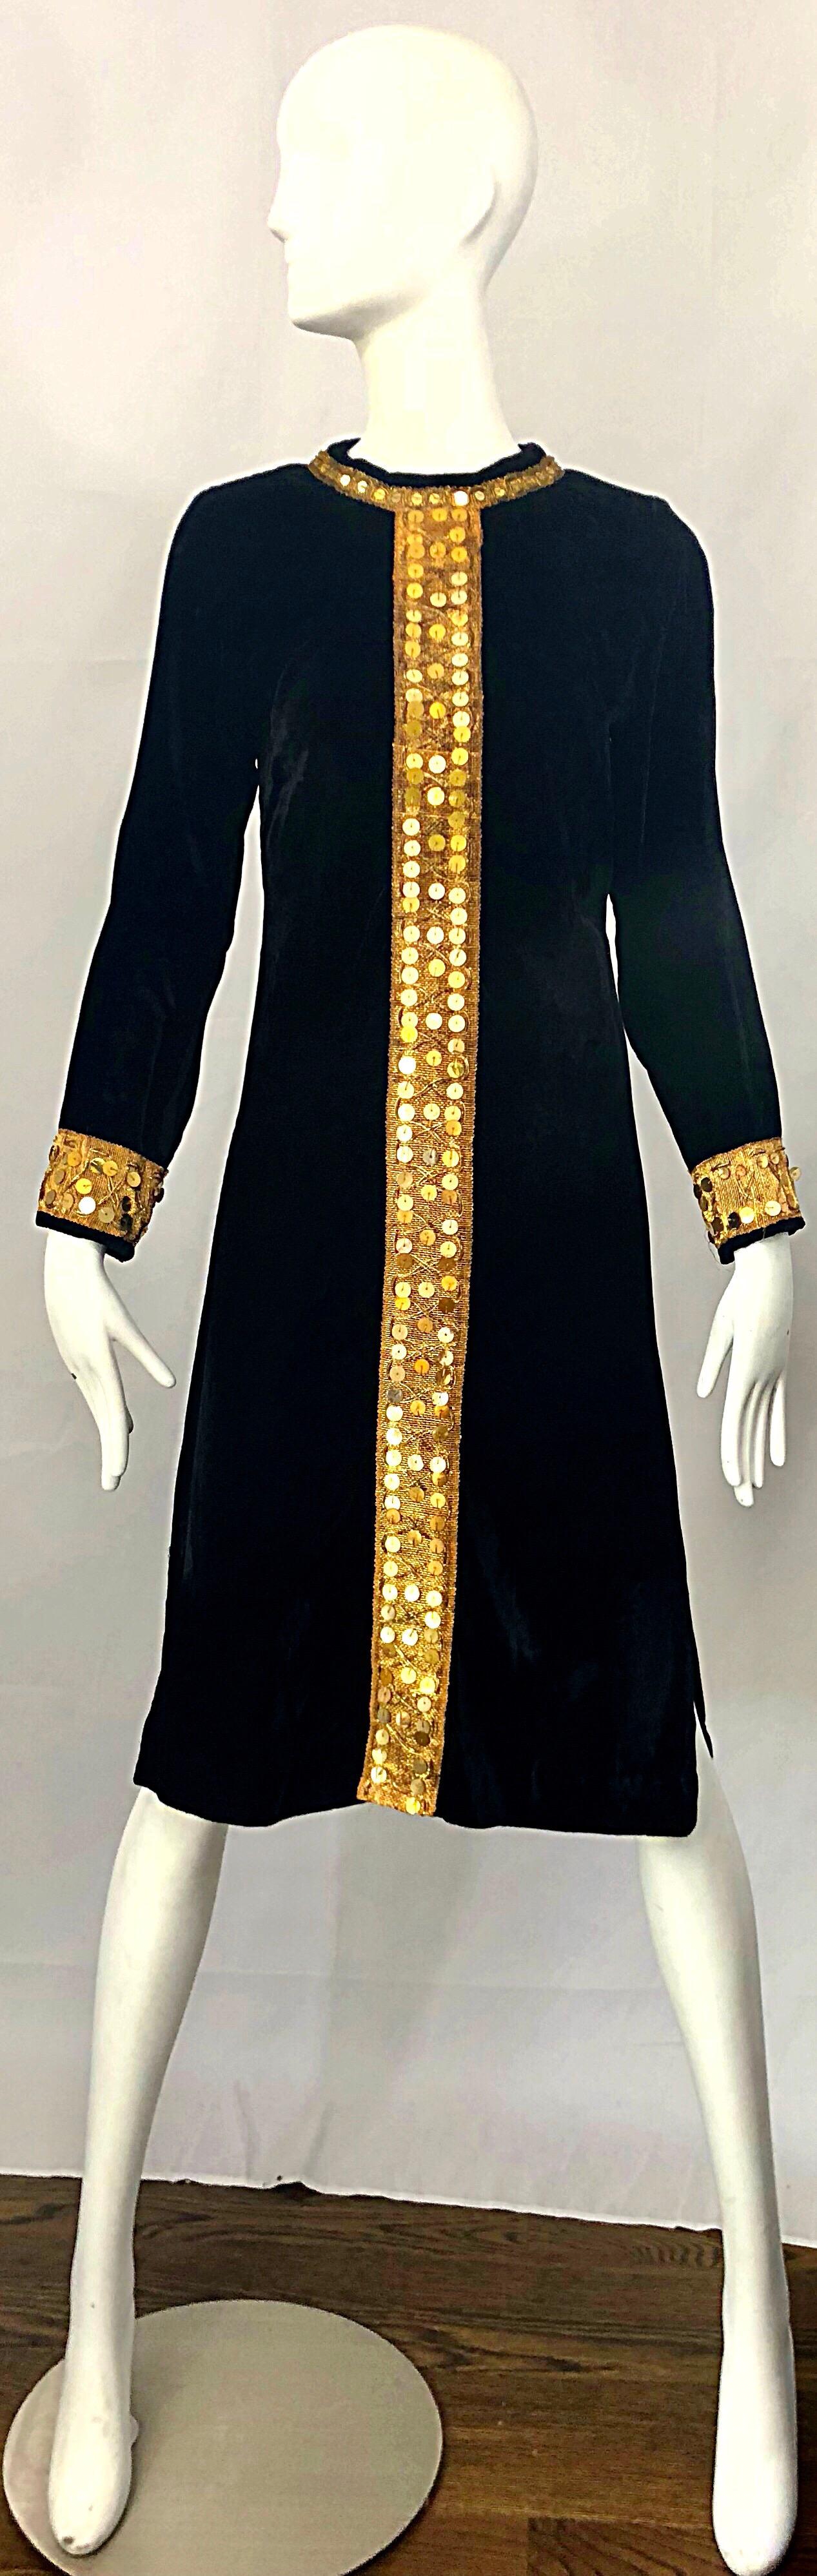 Chic 1960s black velvet and gold sequined long sleeve tunic dress! Features soft cotton velvet, with gold embroidered panel down the front center. Hundreds of large hand-sewn gold sequins down the front, around the neck, and at each sleeve cuff.